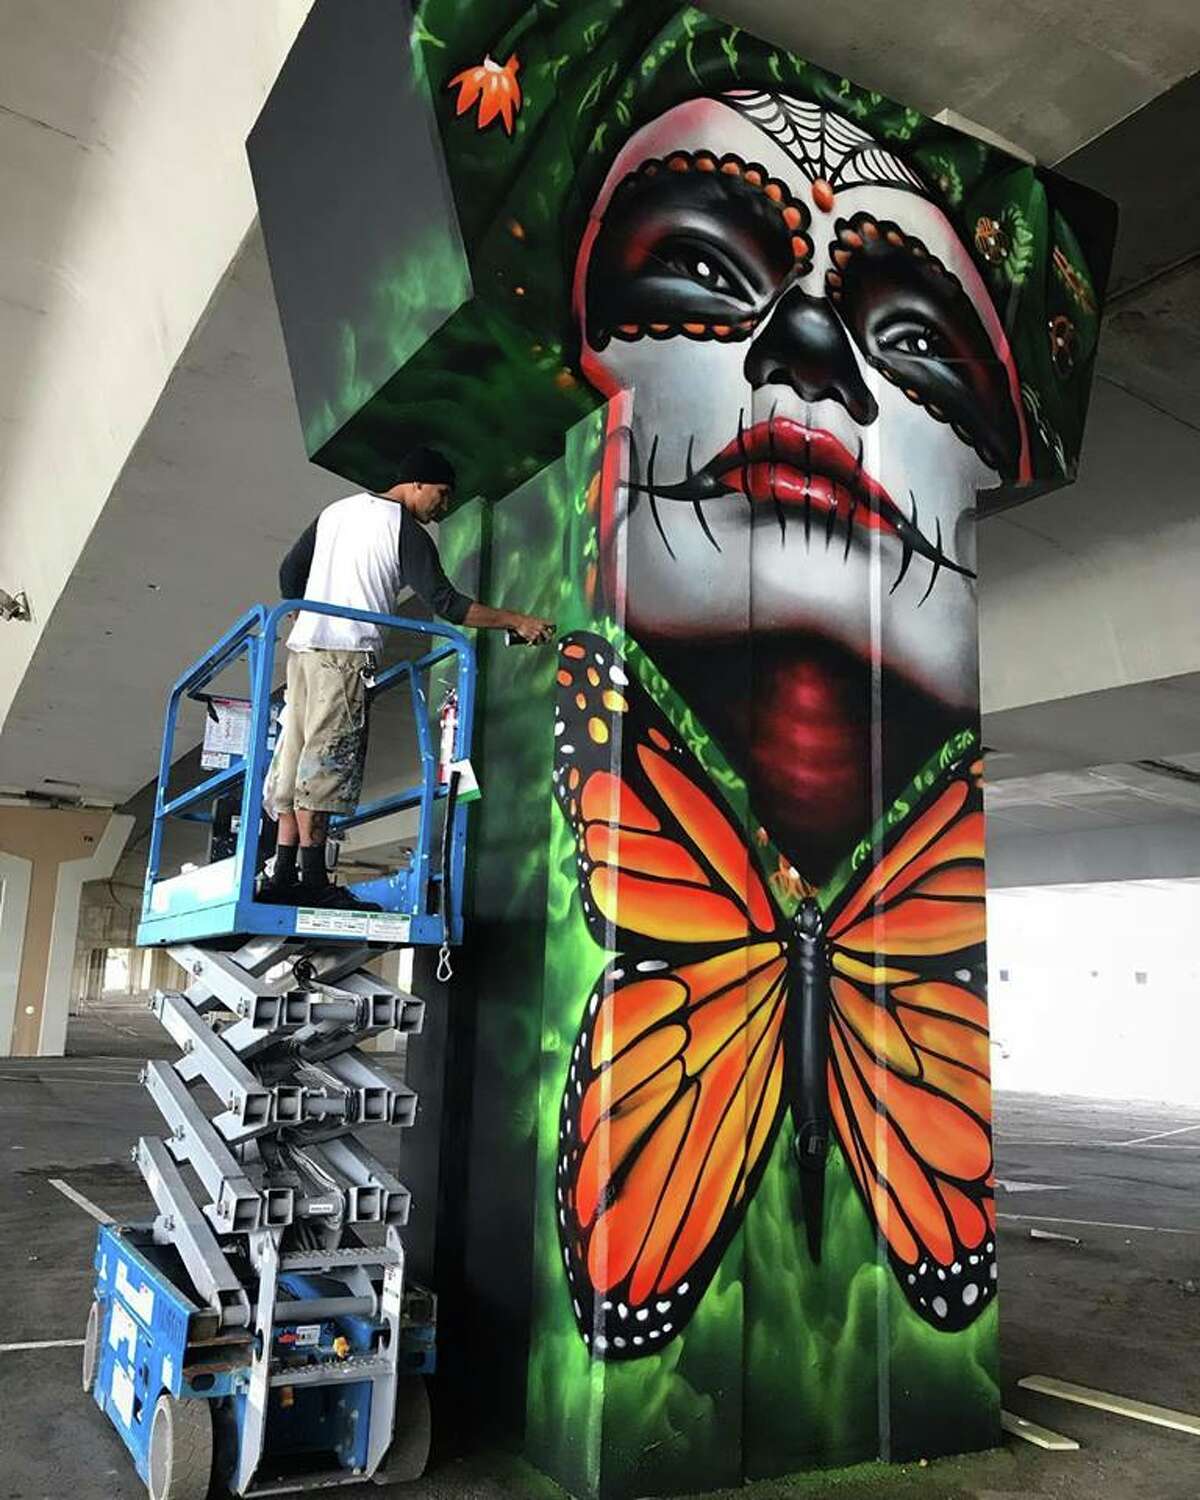 The first phase 1 of the San Antonio Street Art Initiative is a Nov. 3 unveiling of 16 murals by 16 local artists at the Interstate 35 underpass where Quincy and St. Mary's streets meet.